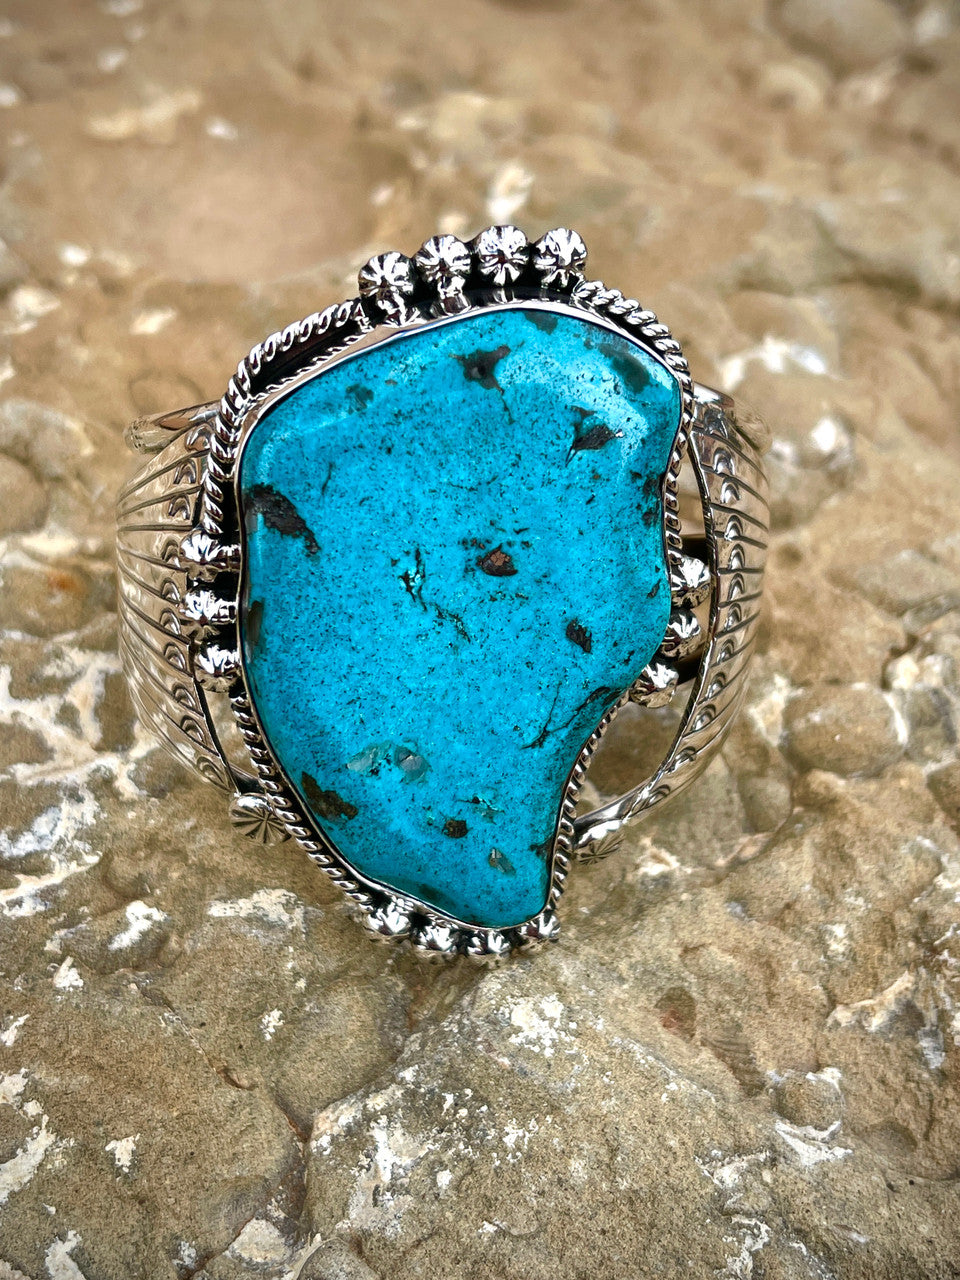 Huge, Nevada Turquoise Stone Created by Navajo Artist Clarence Long